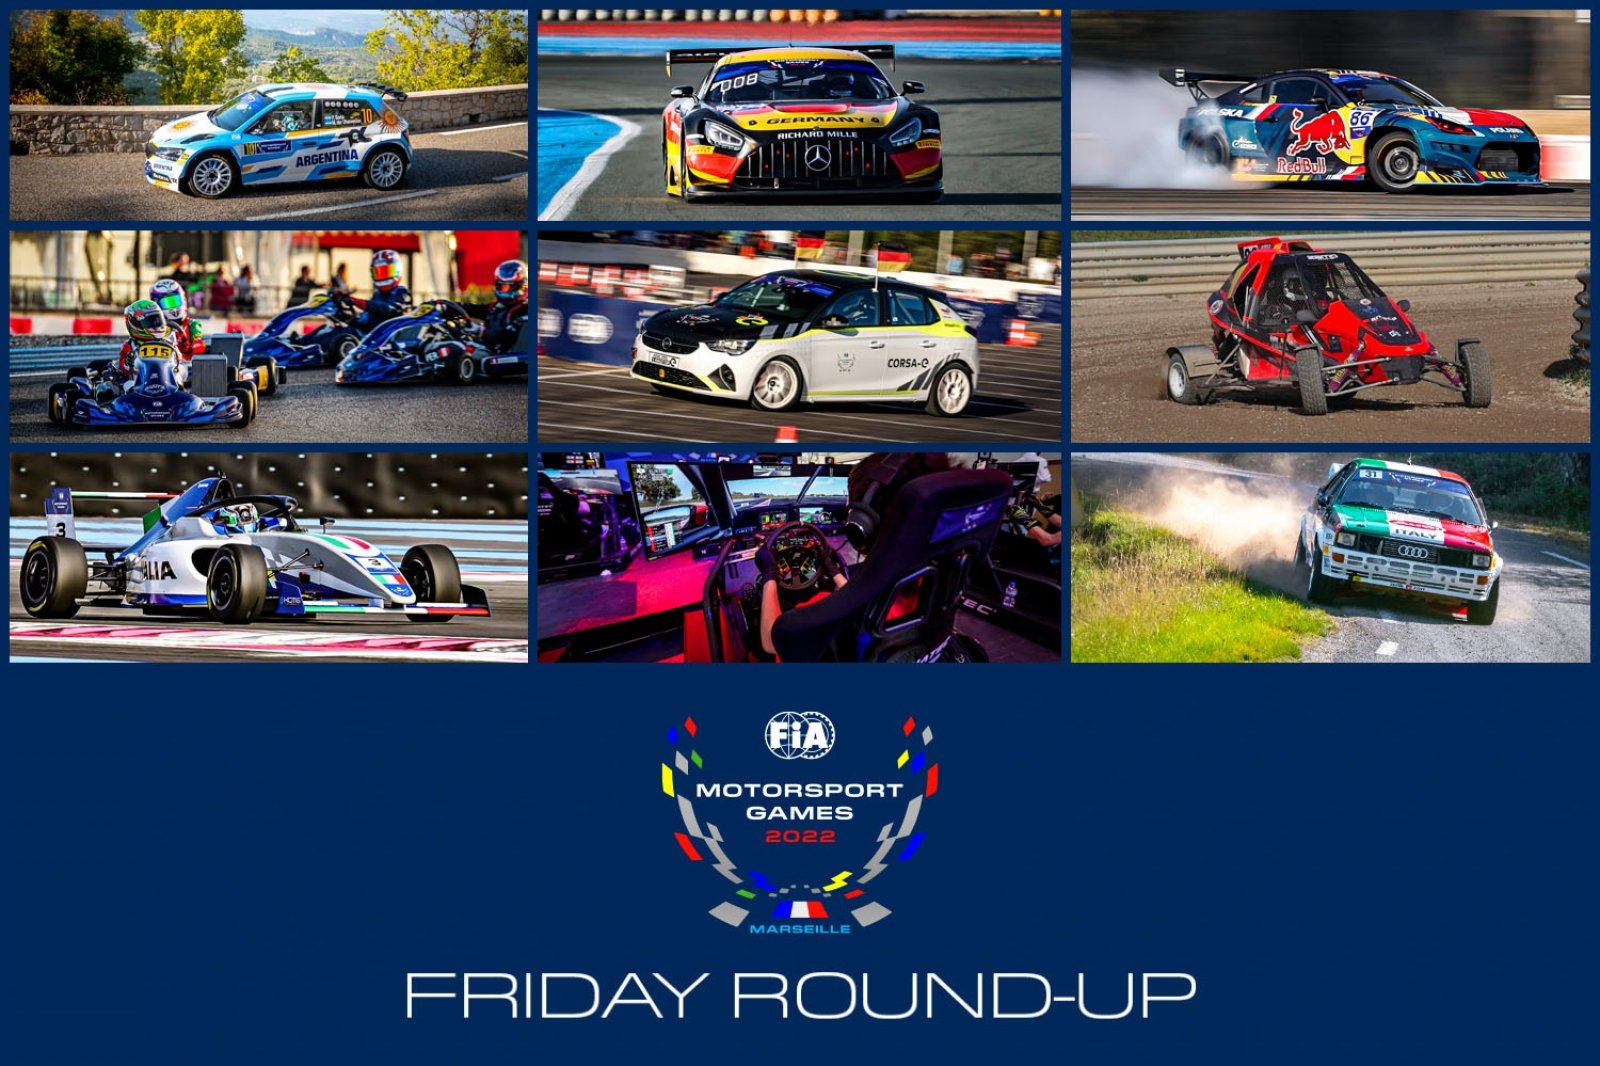 FIA Motorsport Games marks Earth Day by compensating carbon footprint to support vital environmental projects